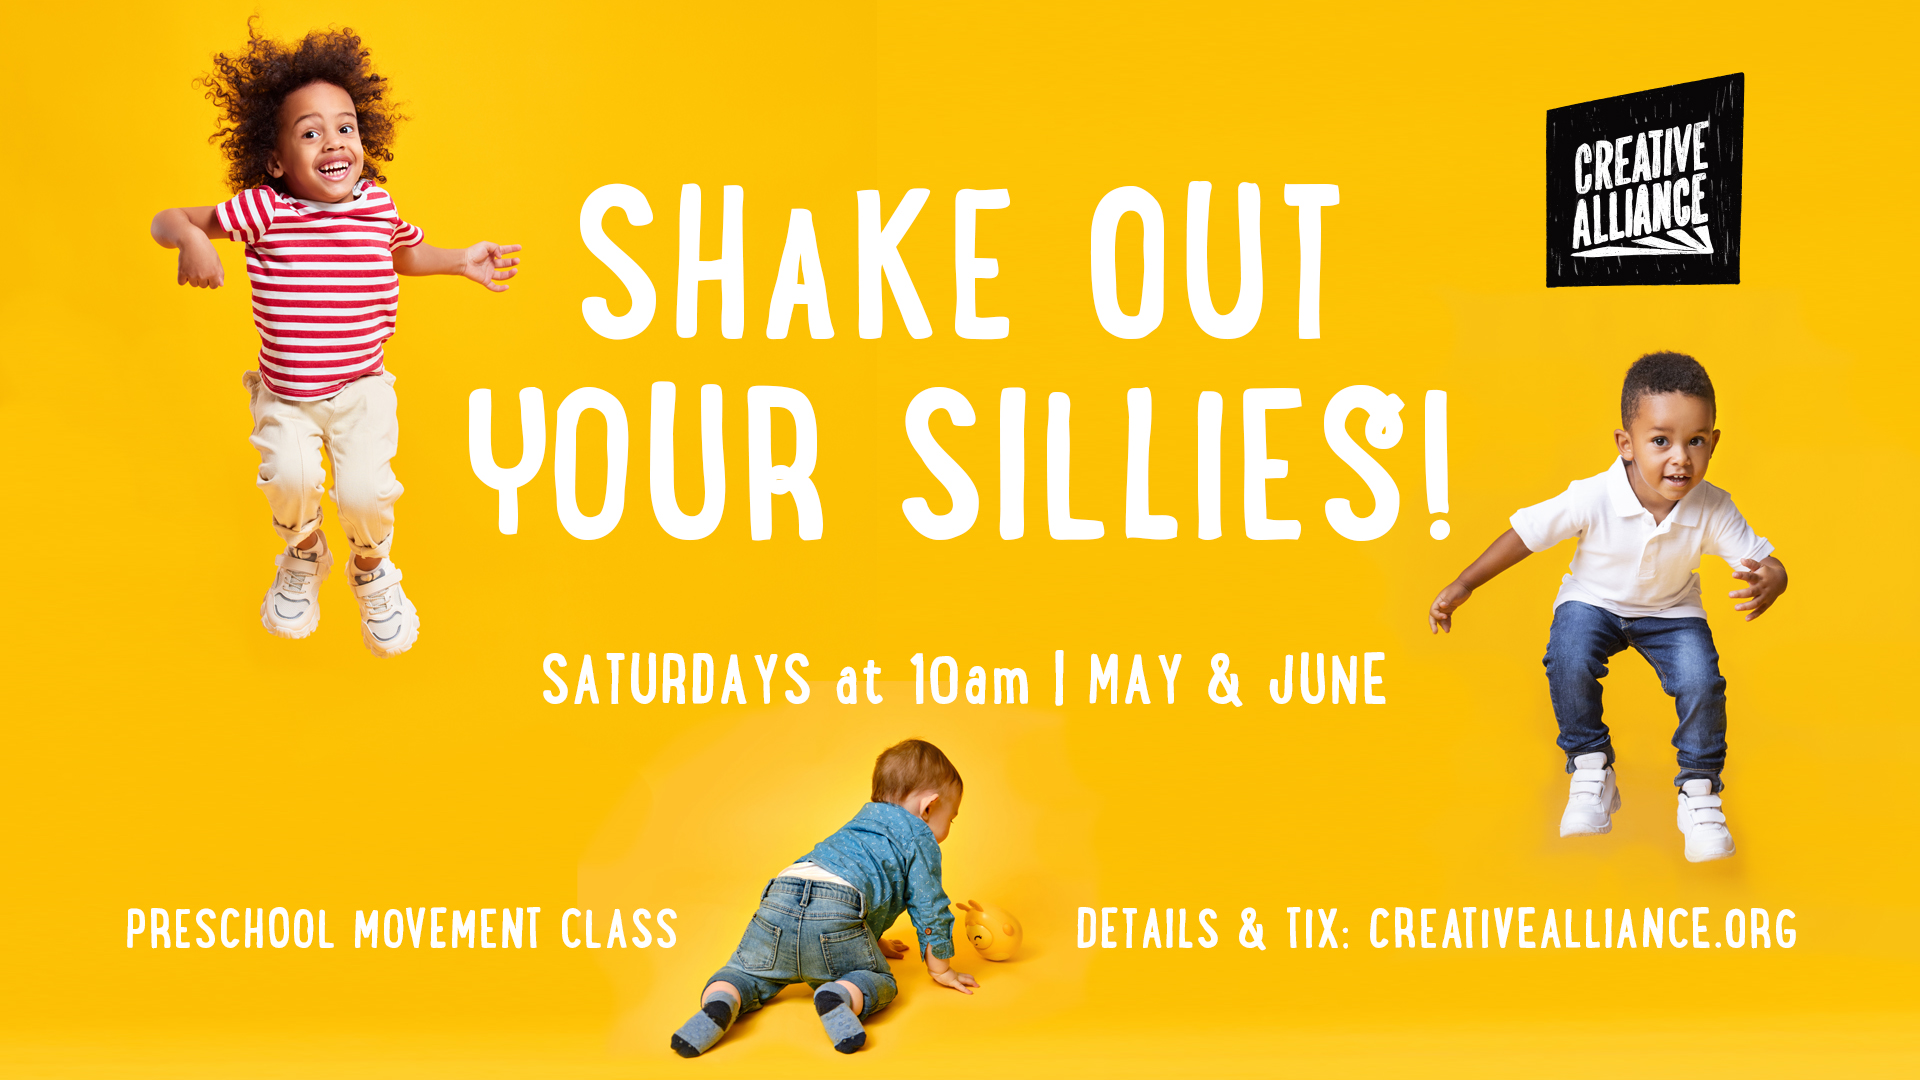 Shake Out Your Sillies Preschool Movement Class